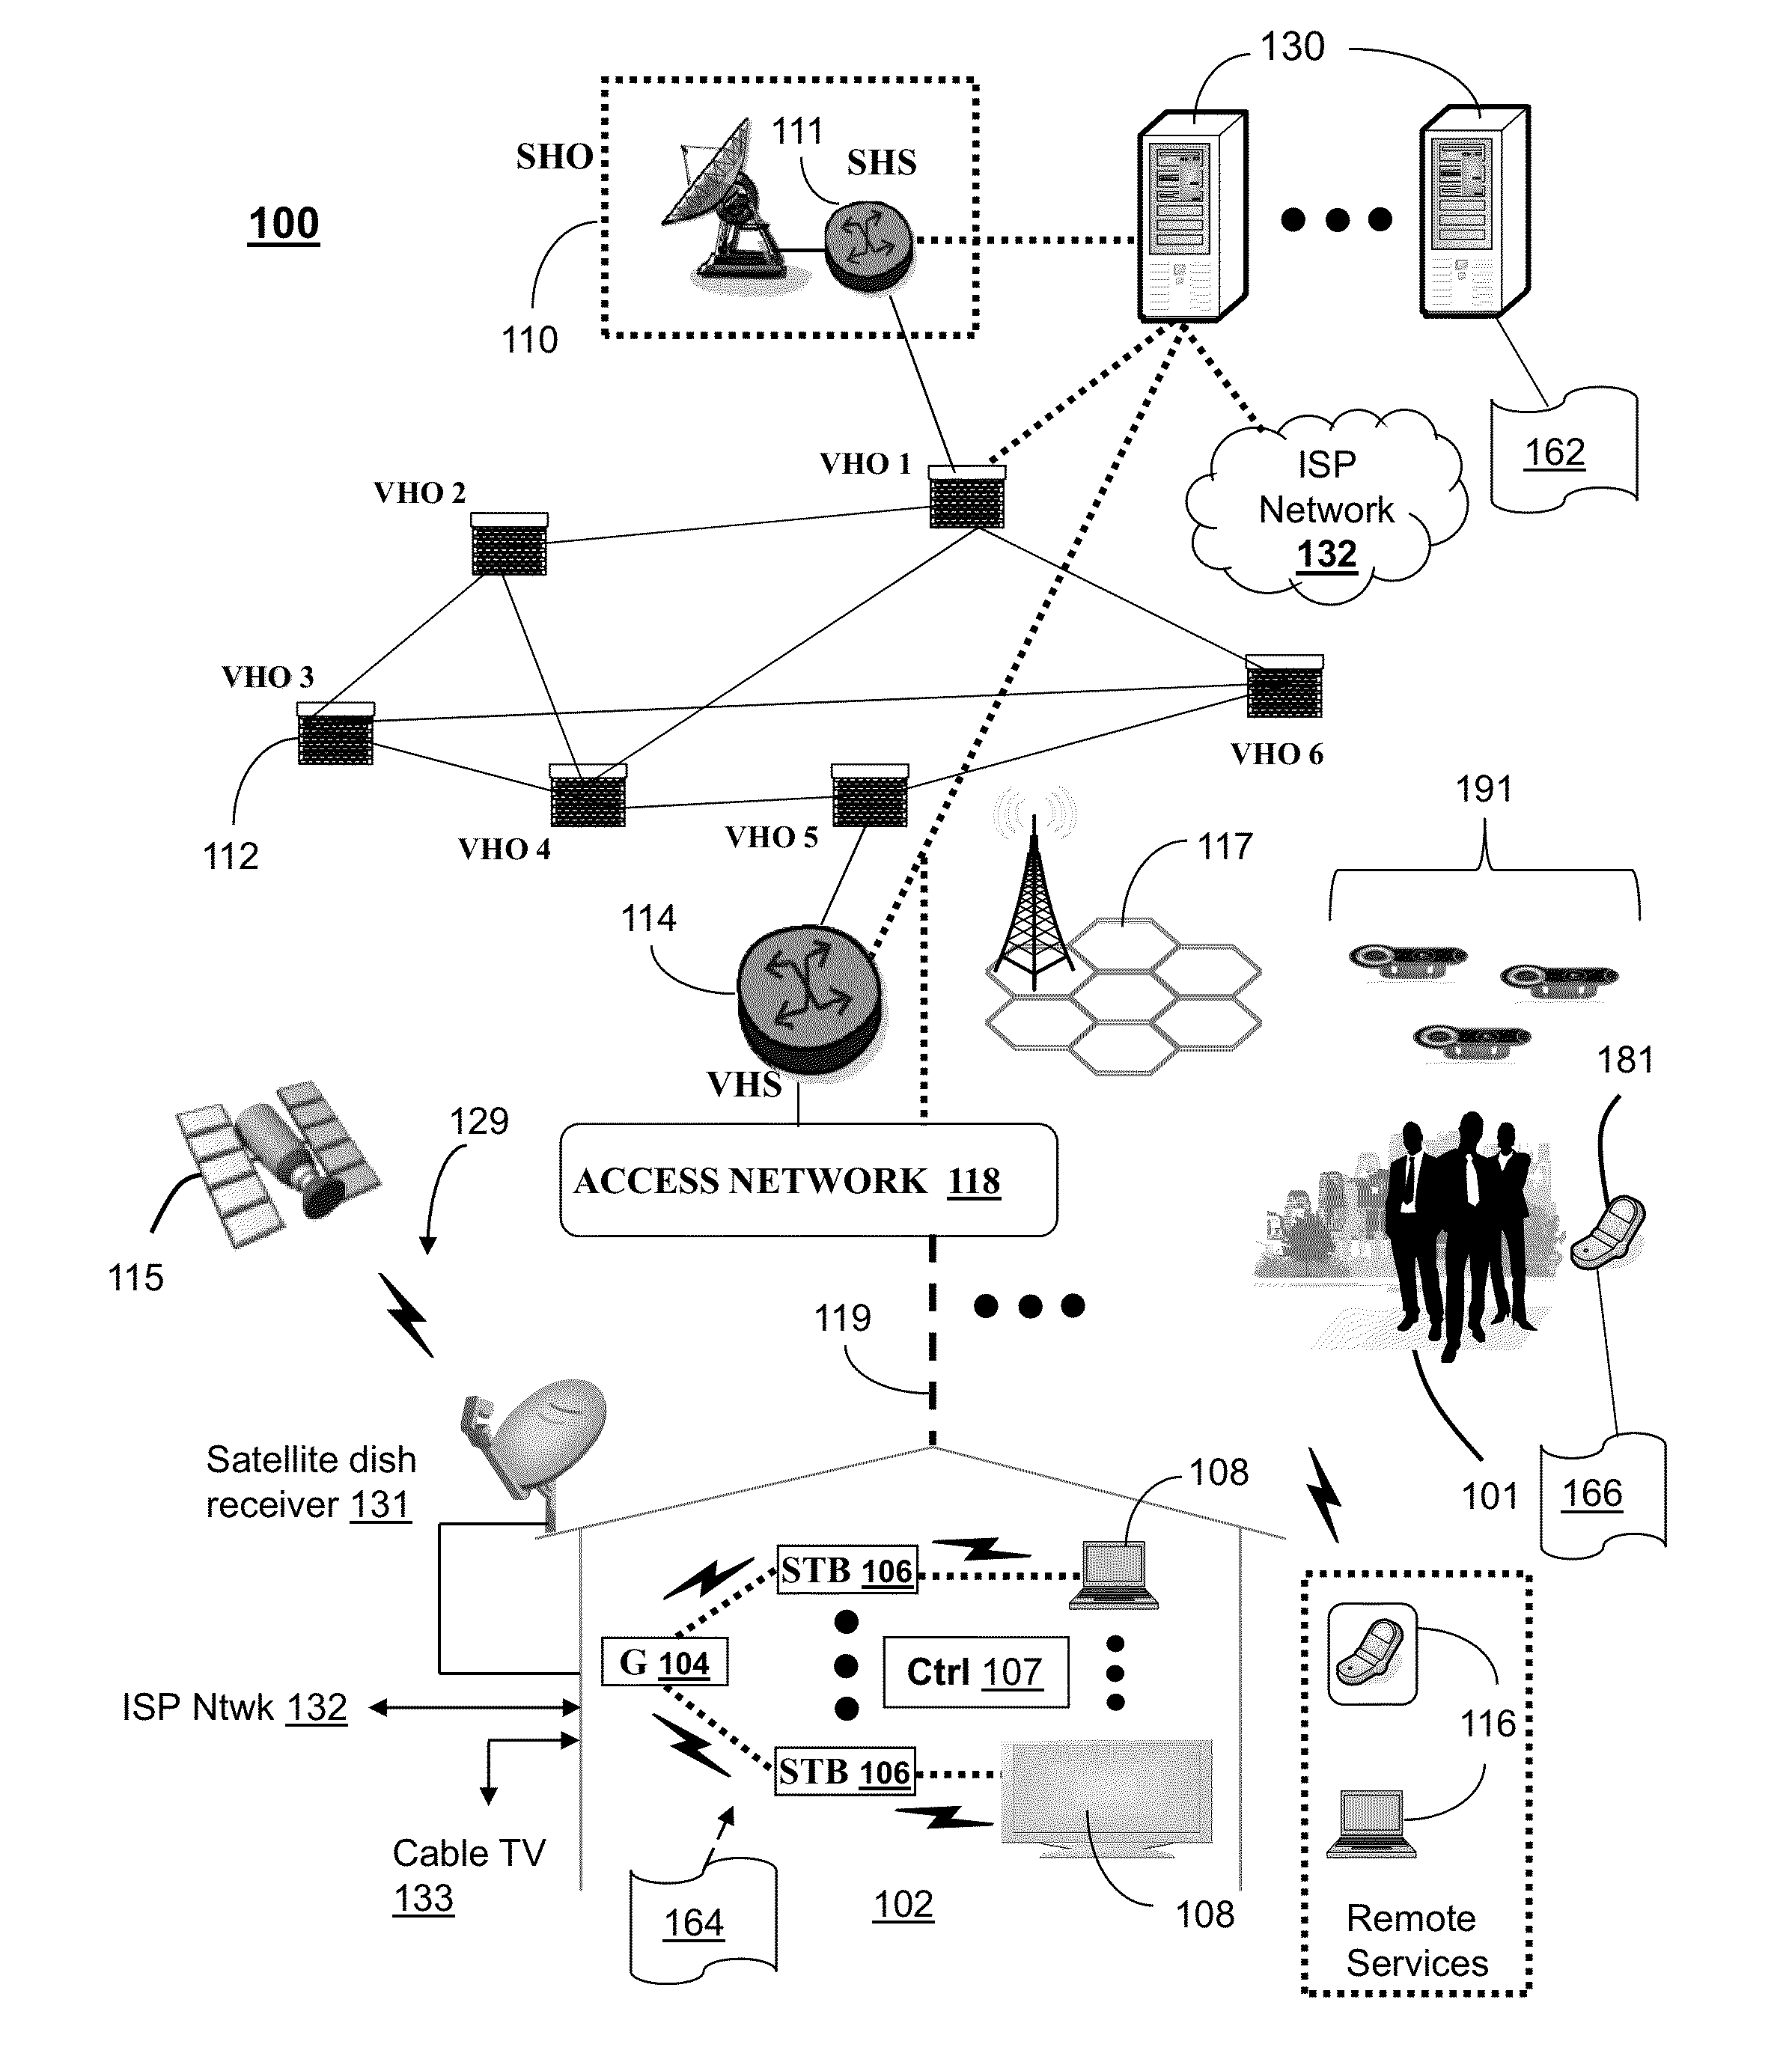 Method and apparatus for managing a camera network